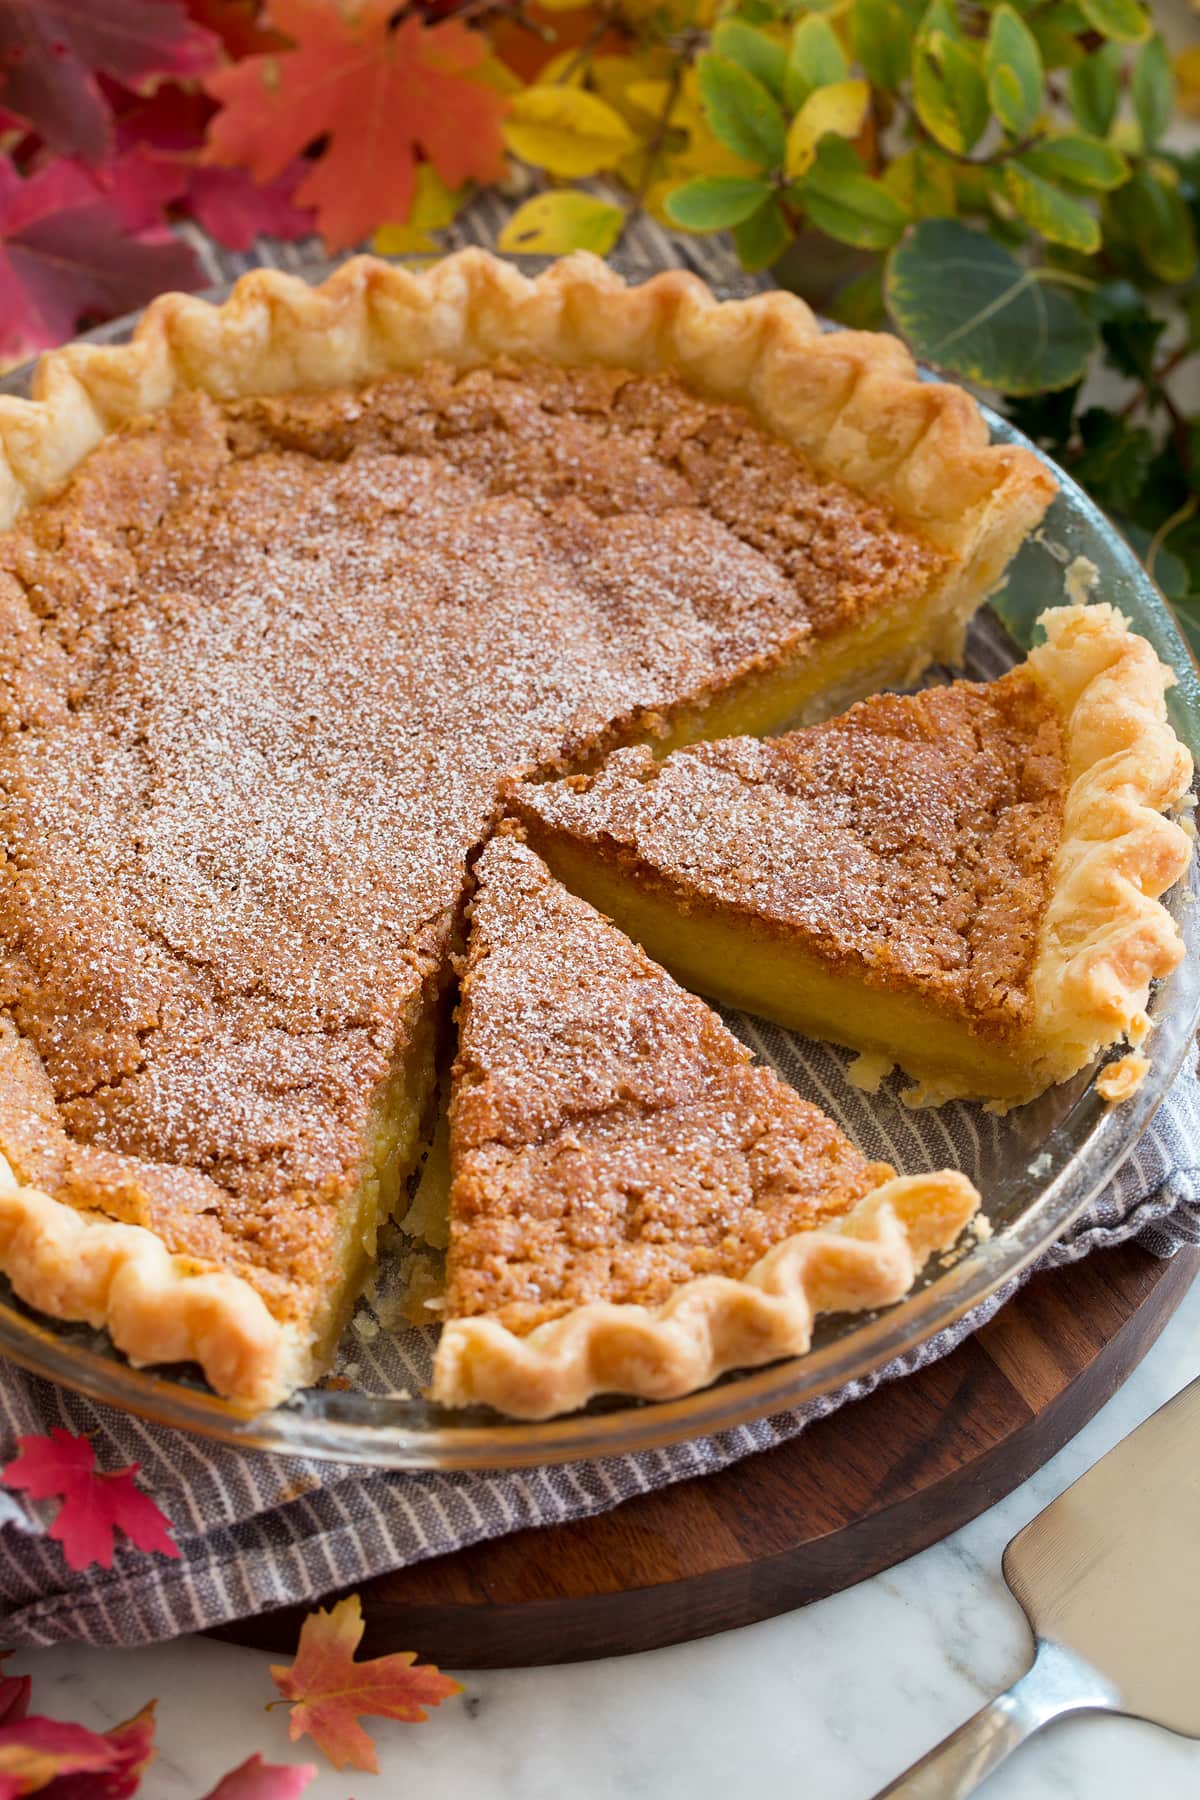 Image of chess pie cut into slices. Pie is shown in a glass baking dish set over a grey cloth on a wooden serving tray.